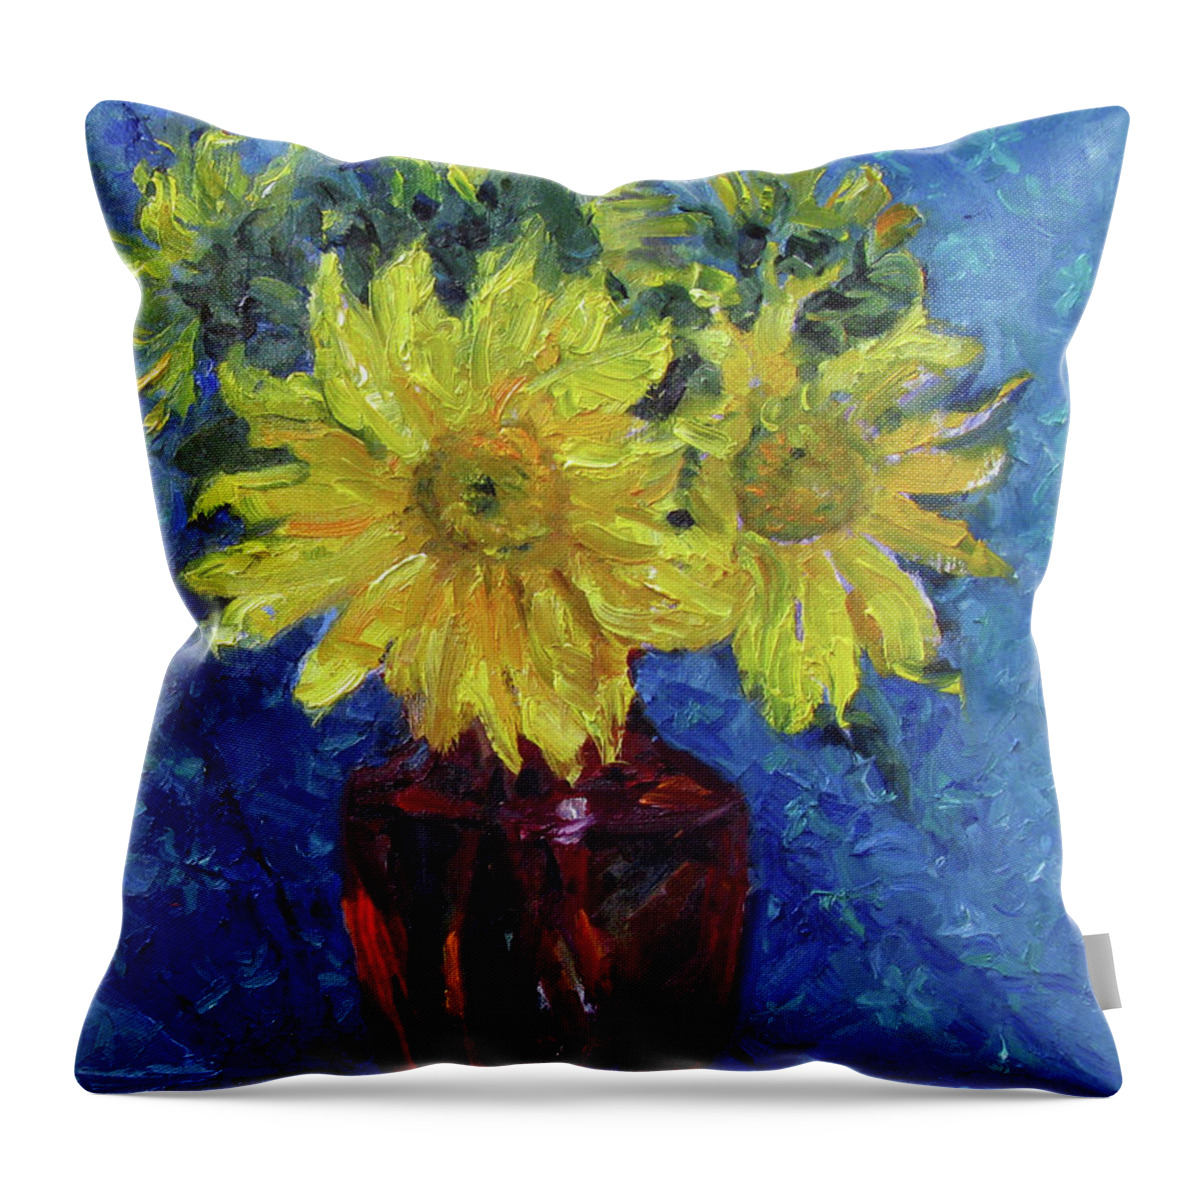 Flower Throw Pillow featuring the painting Sun Flower by John McCormick